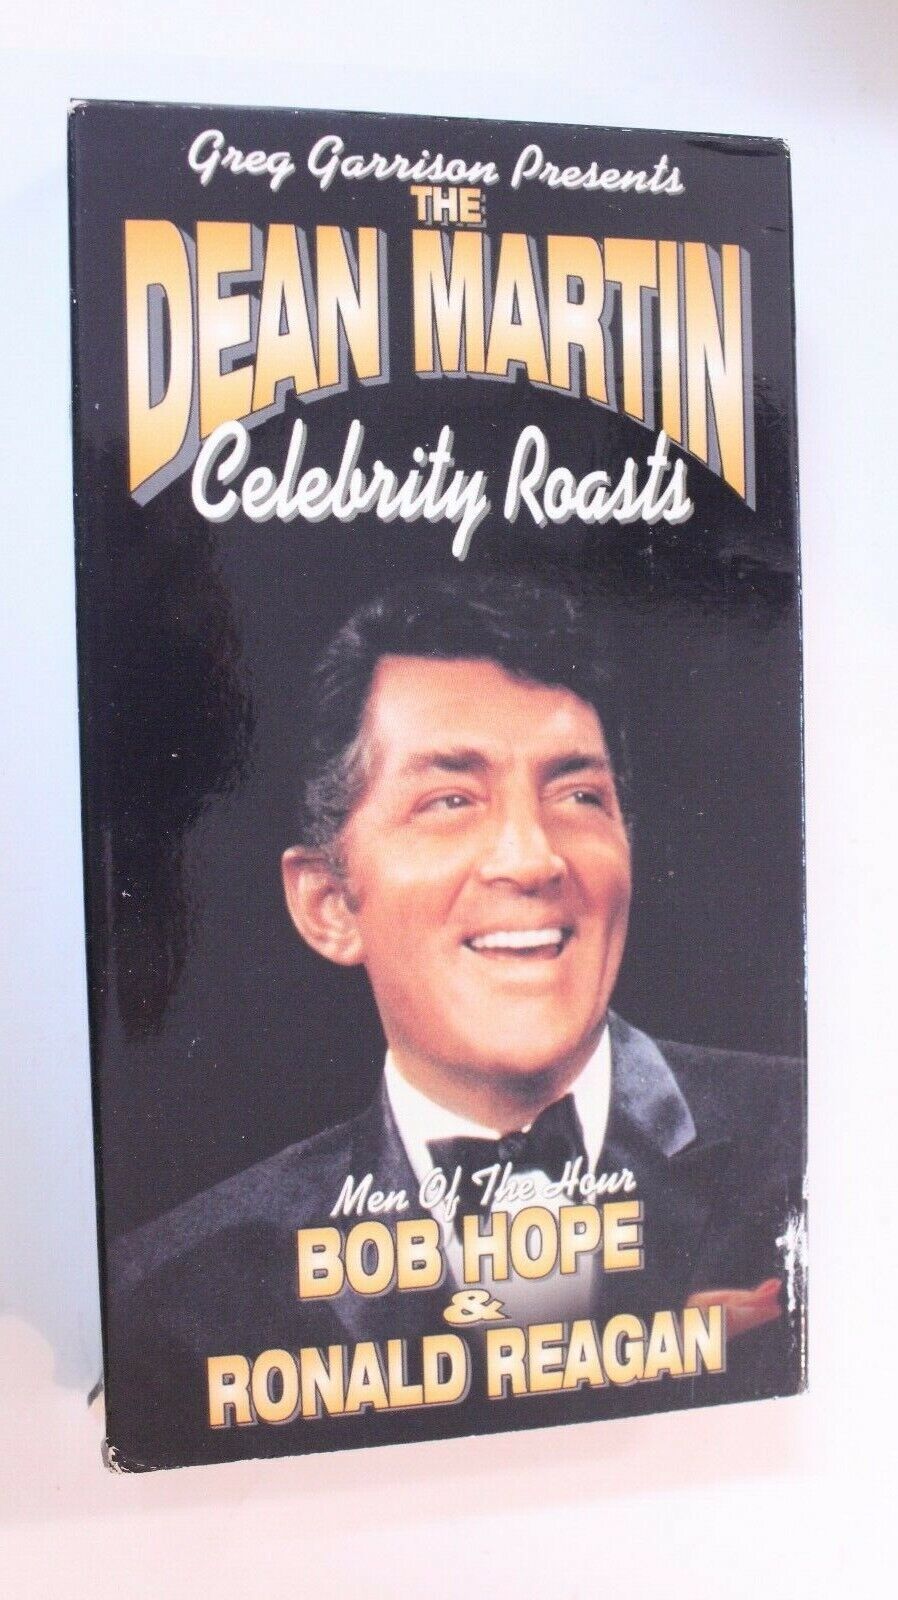 Primary image for Dean Martin Celebrity Roasts VHS Tape Bob Hope and Ronald Reagan S2B